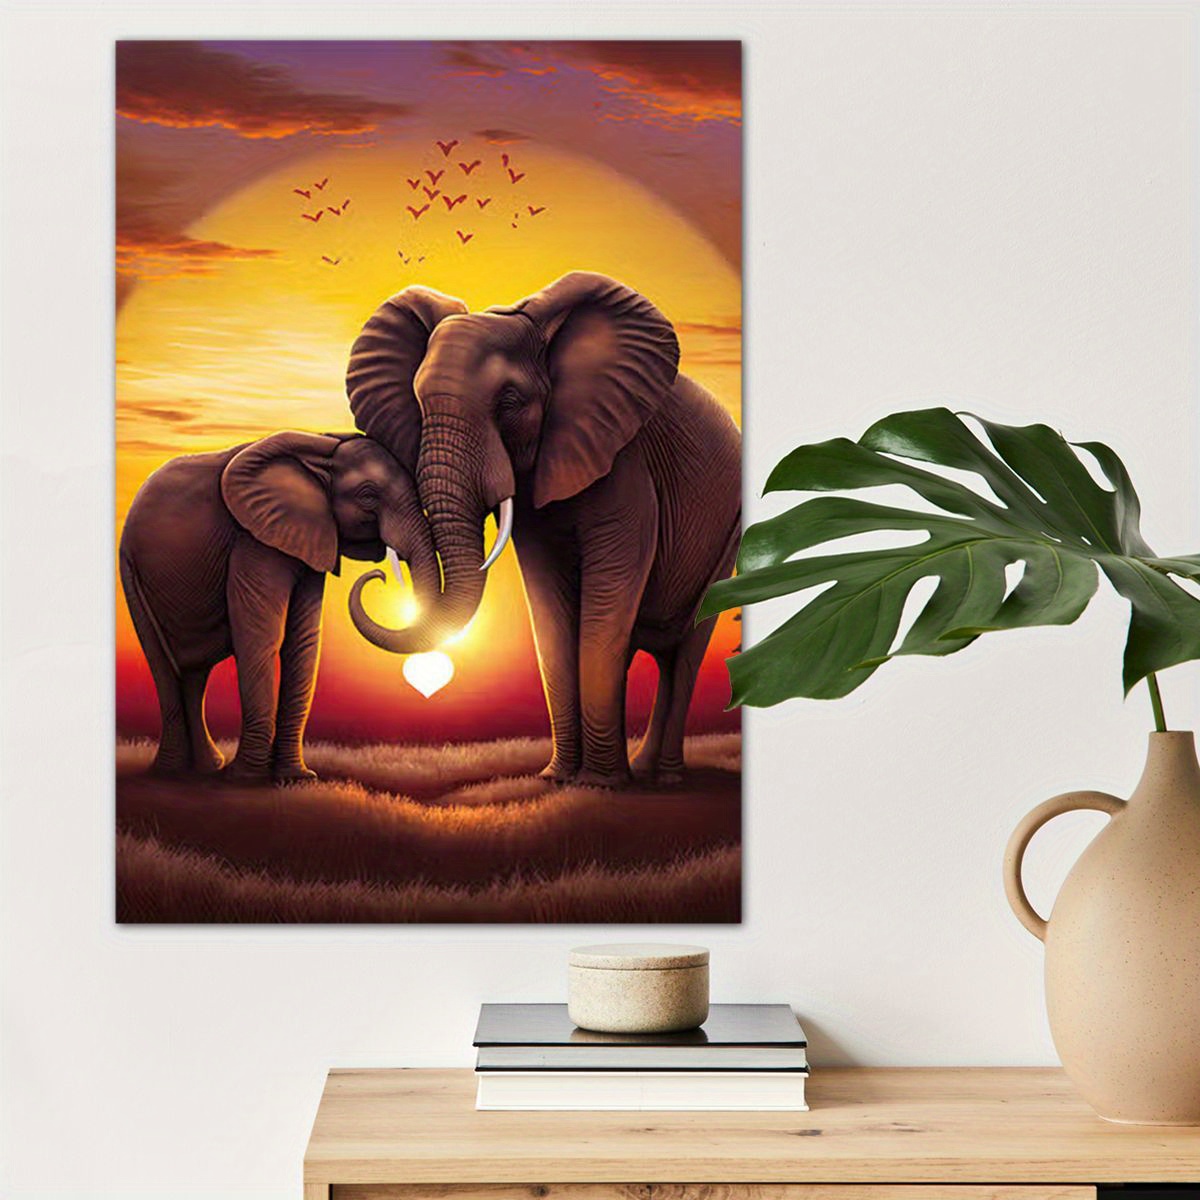 

1pc Elephant At Sunset Poster Canvas Wall Art For Home Decor, Animal Lovers Poster Wall Decor High Quality Canvas Prints For Living Room Bedroom Kitchen Office Cafe Decor, Perfect Gift And Decoration